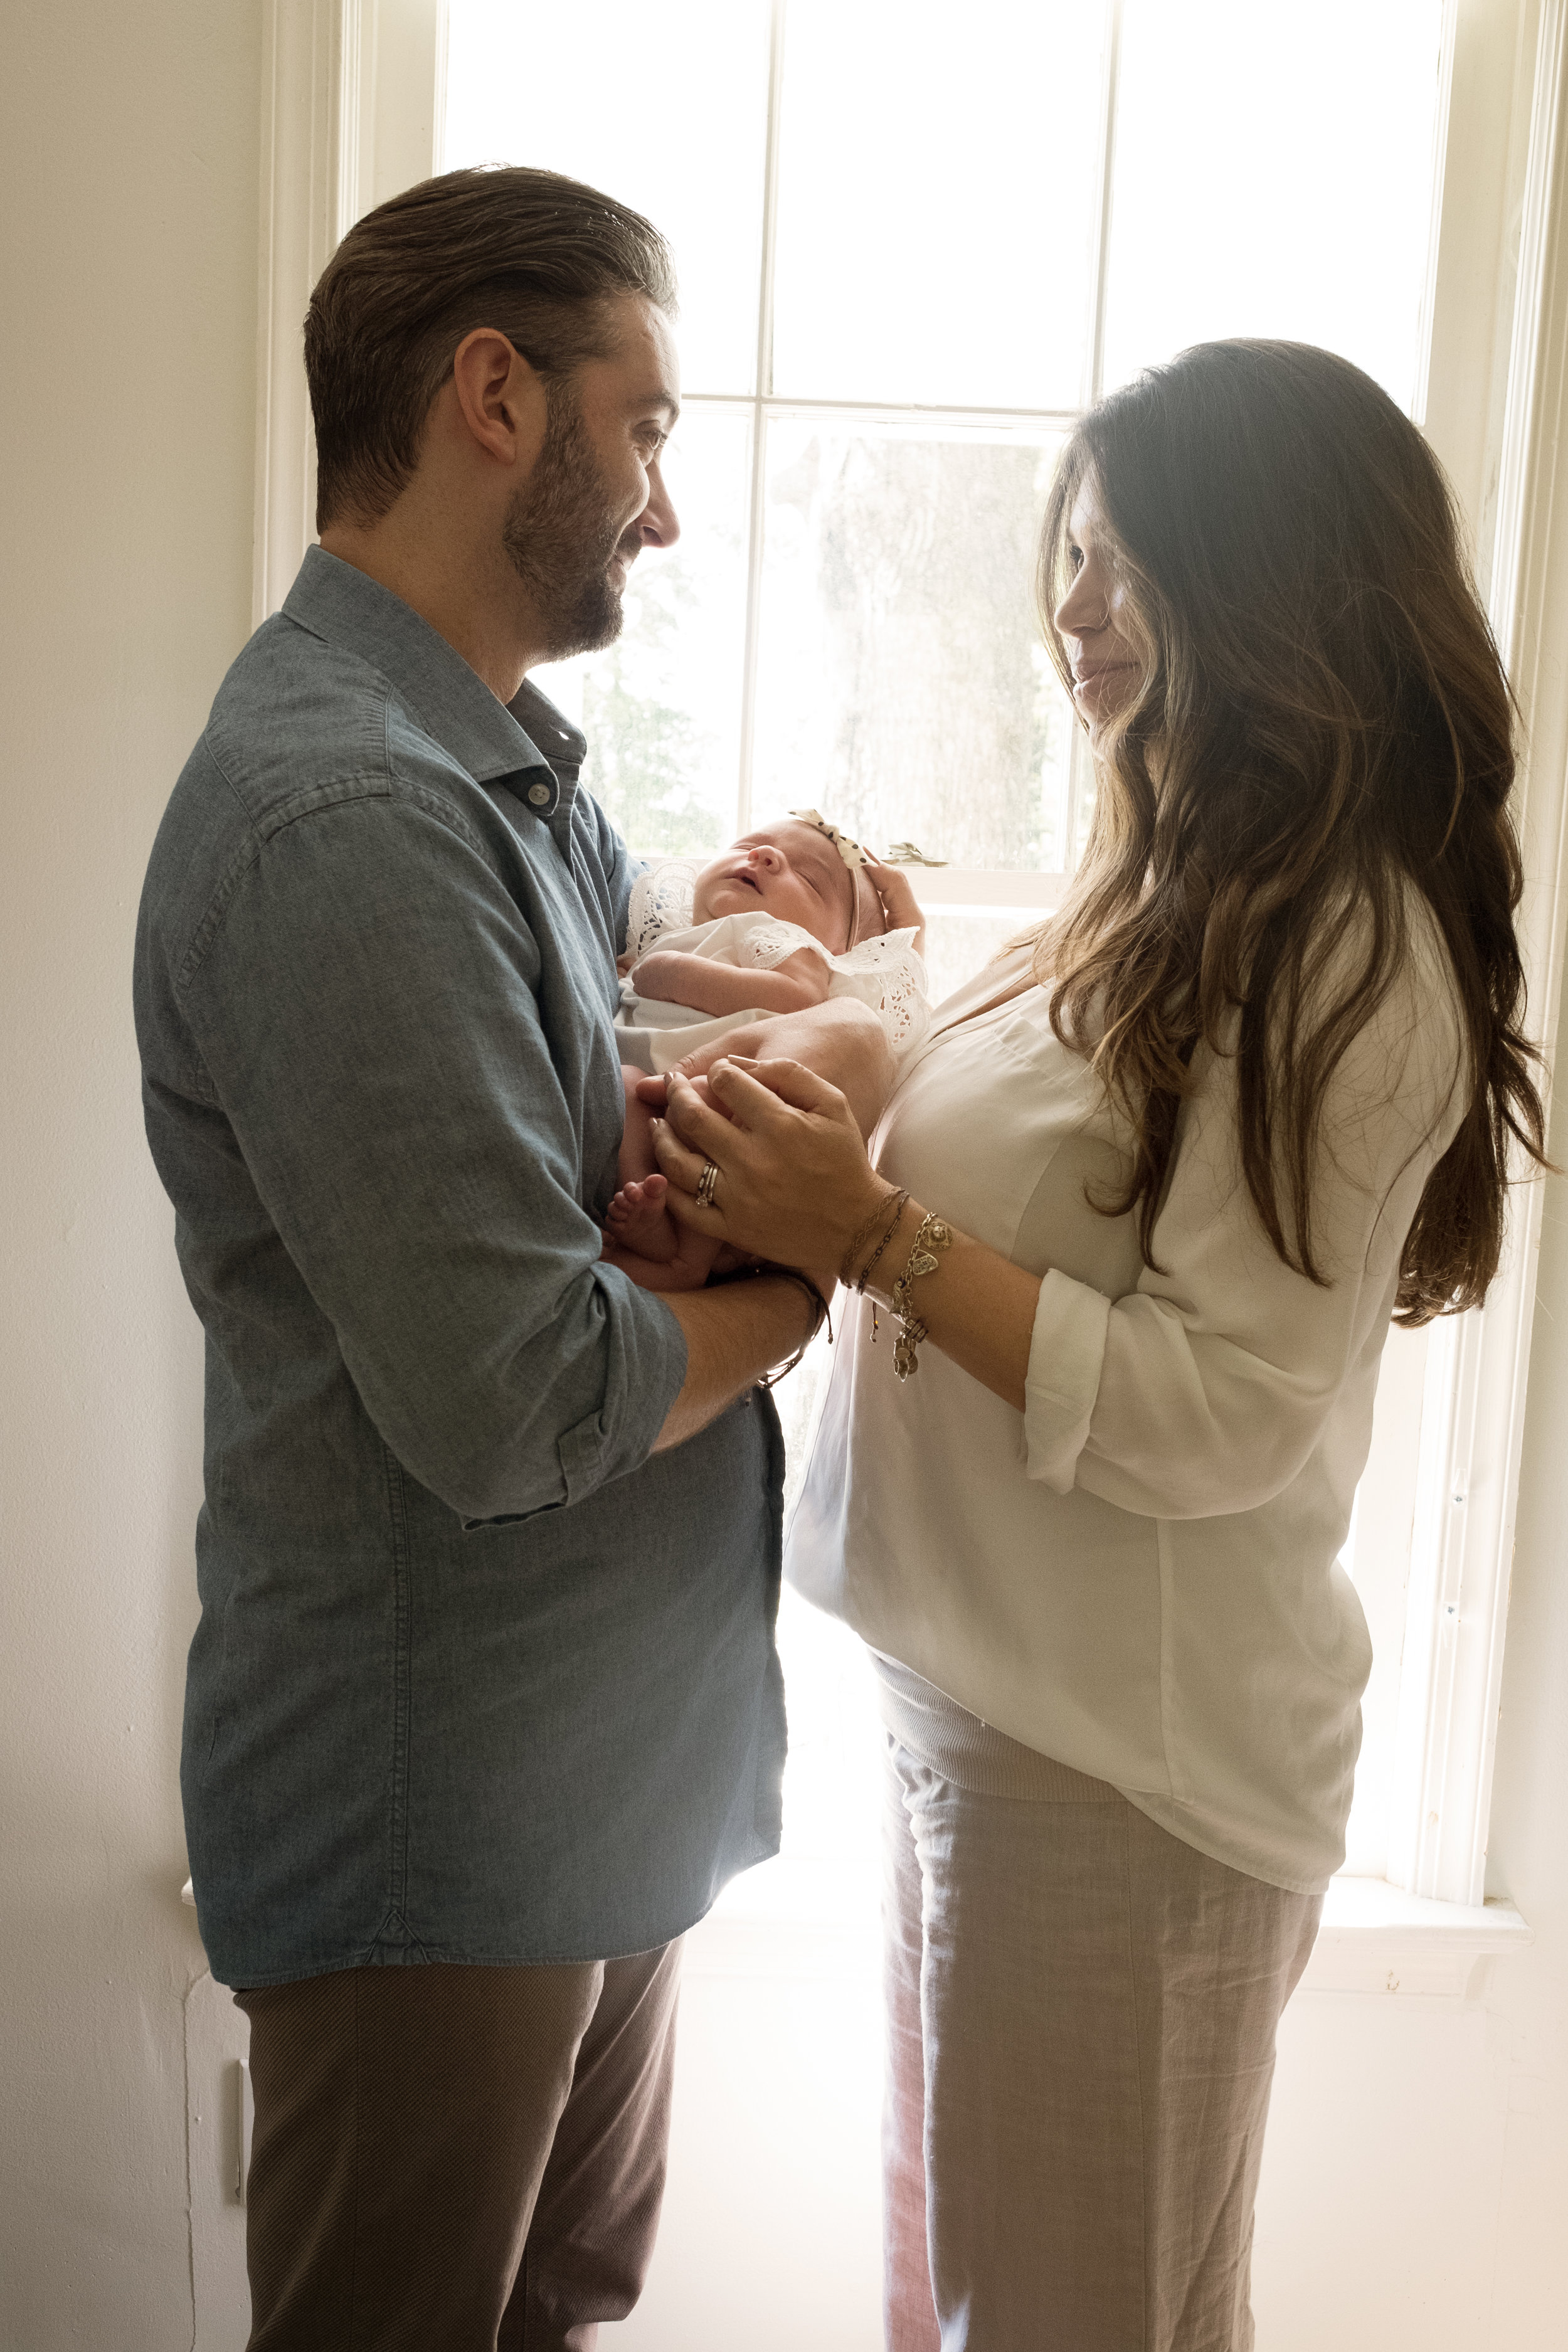 color photograph of new parents facing each other and looking at newborn baby girl